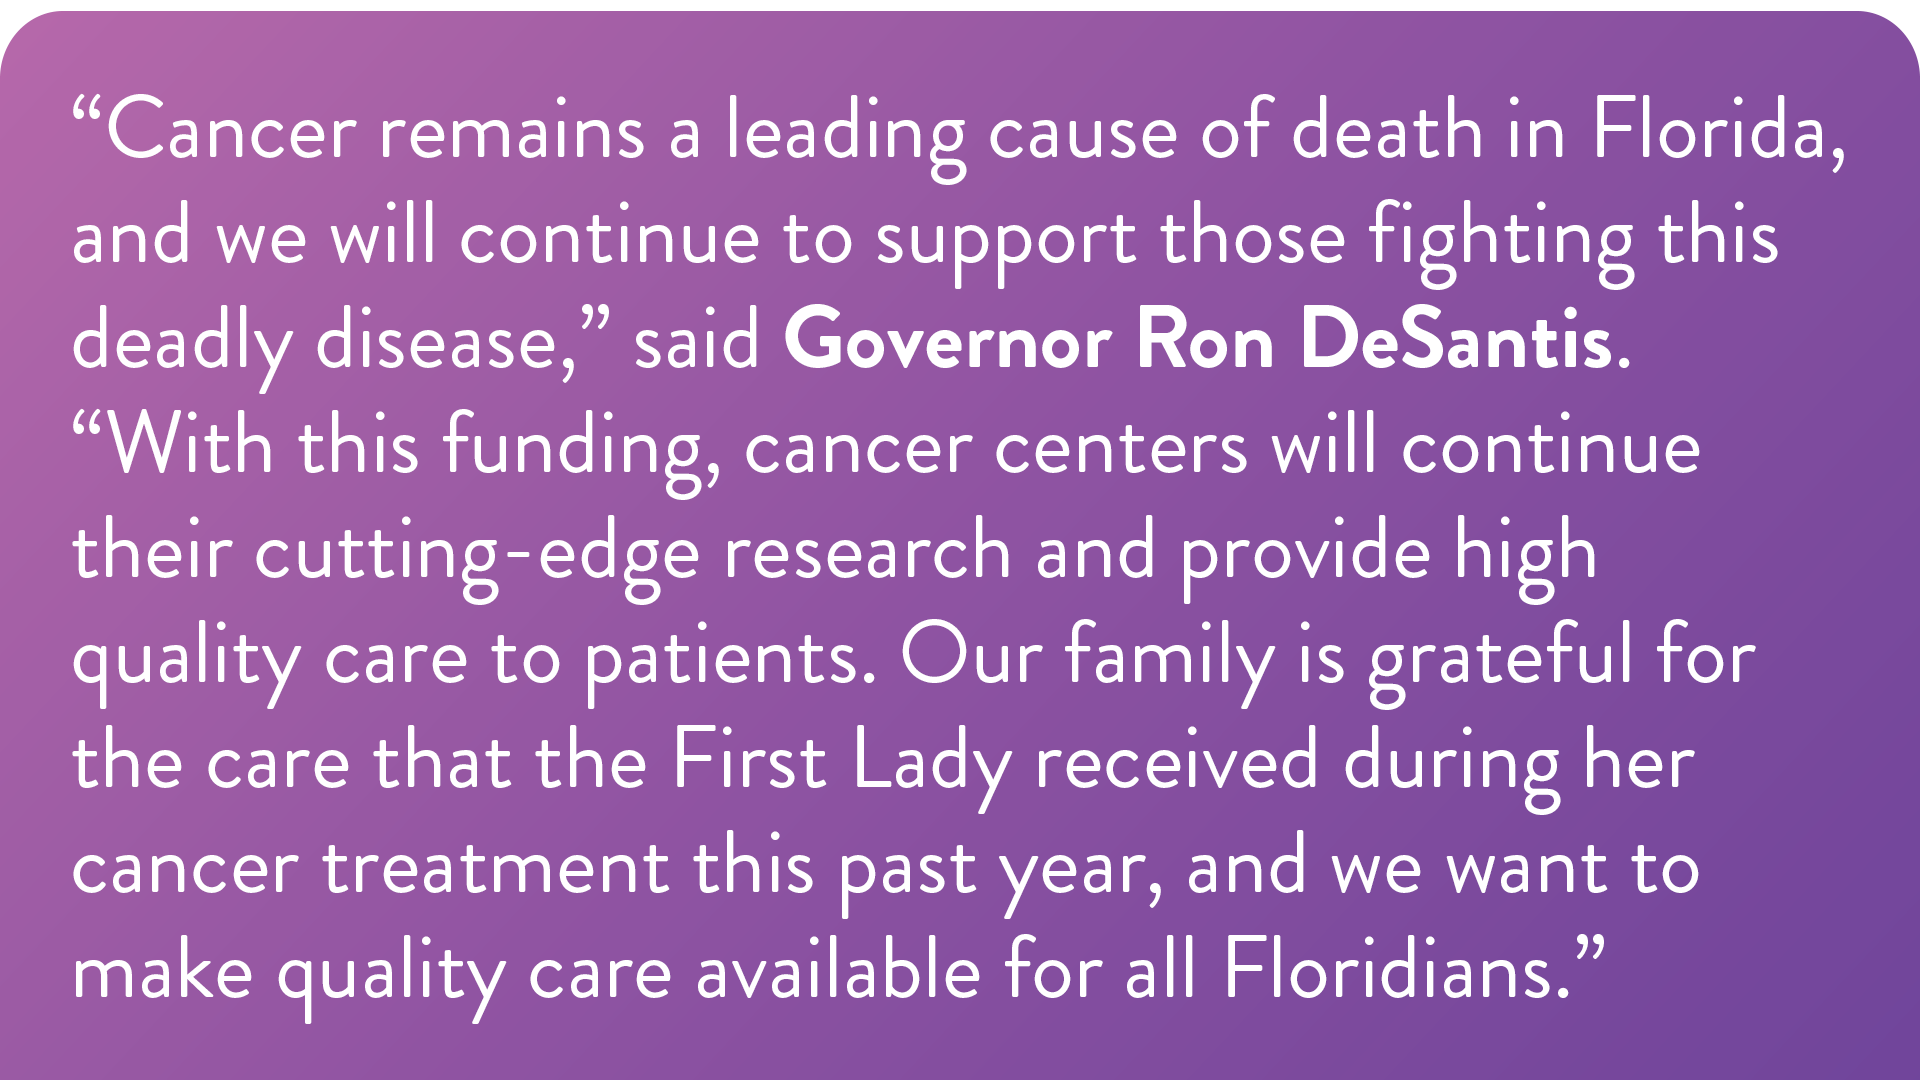 “Cancer remains a leading cause of death in Florida, and we will continue to support those fighting this deadly disease,” said Governor Ron DeSantis. “With this funding, cancer centers will continue their cutting-edge research and provide high quality care to patients. Our family is grateful for the care that the First Lady received during her cancer treatment this past year, and we want to make quality care available for all Floridians.”